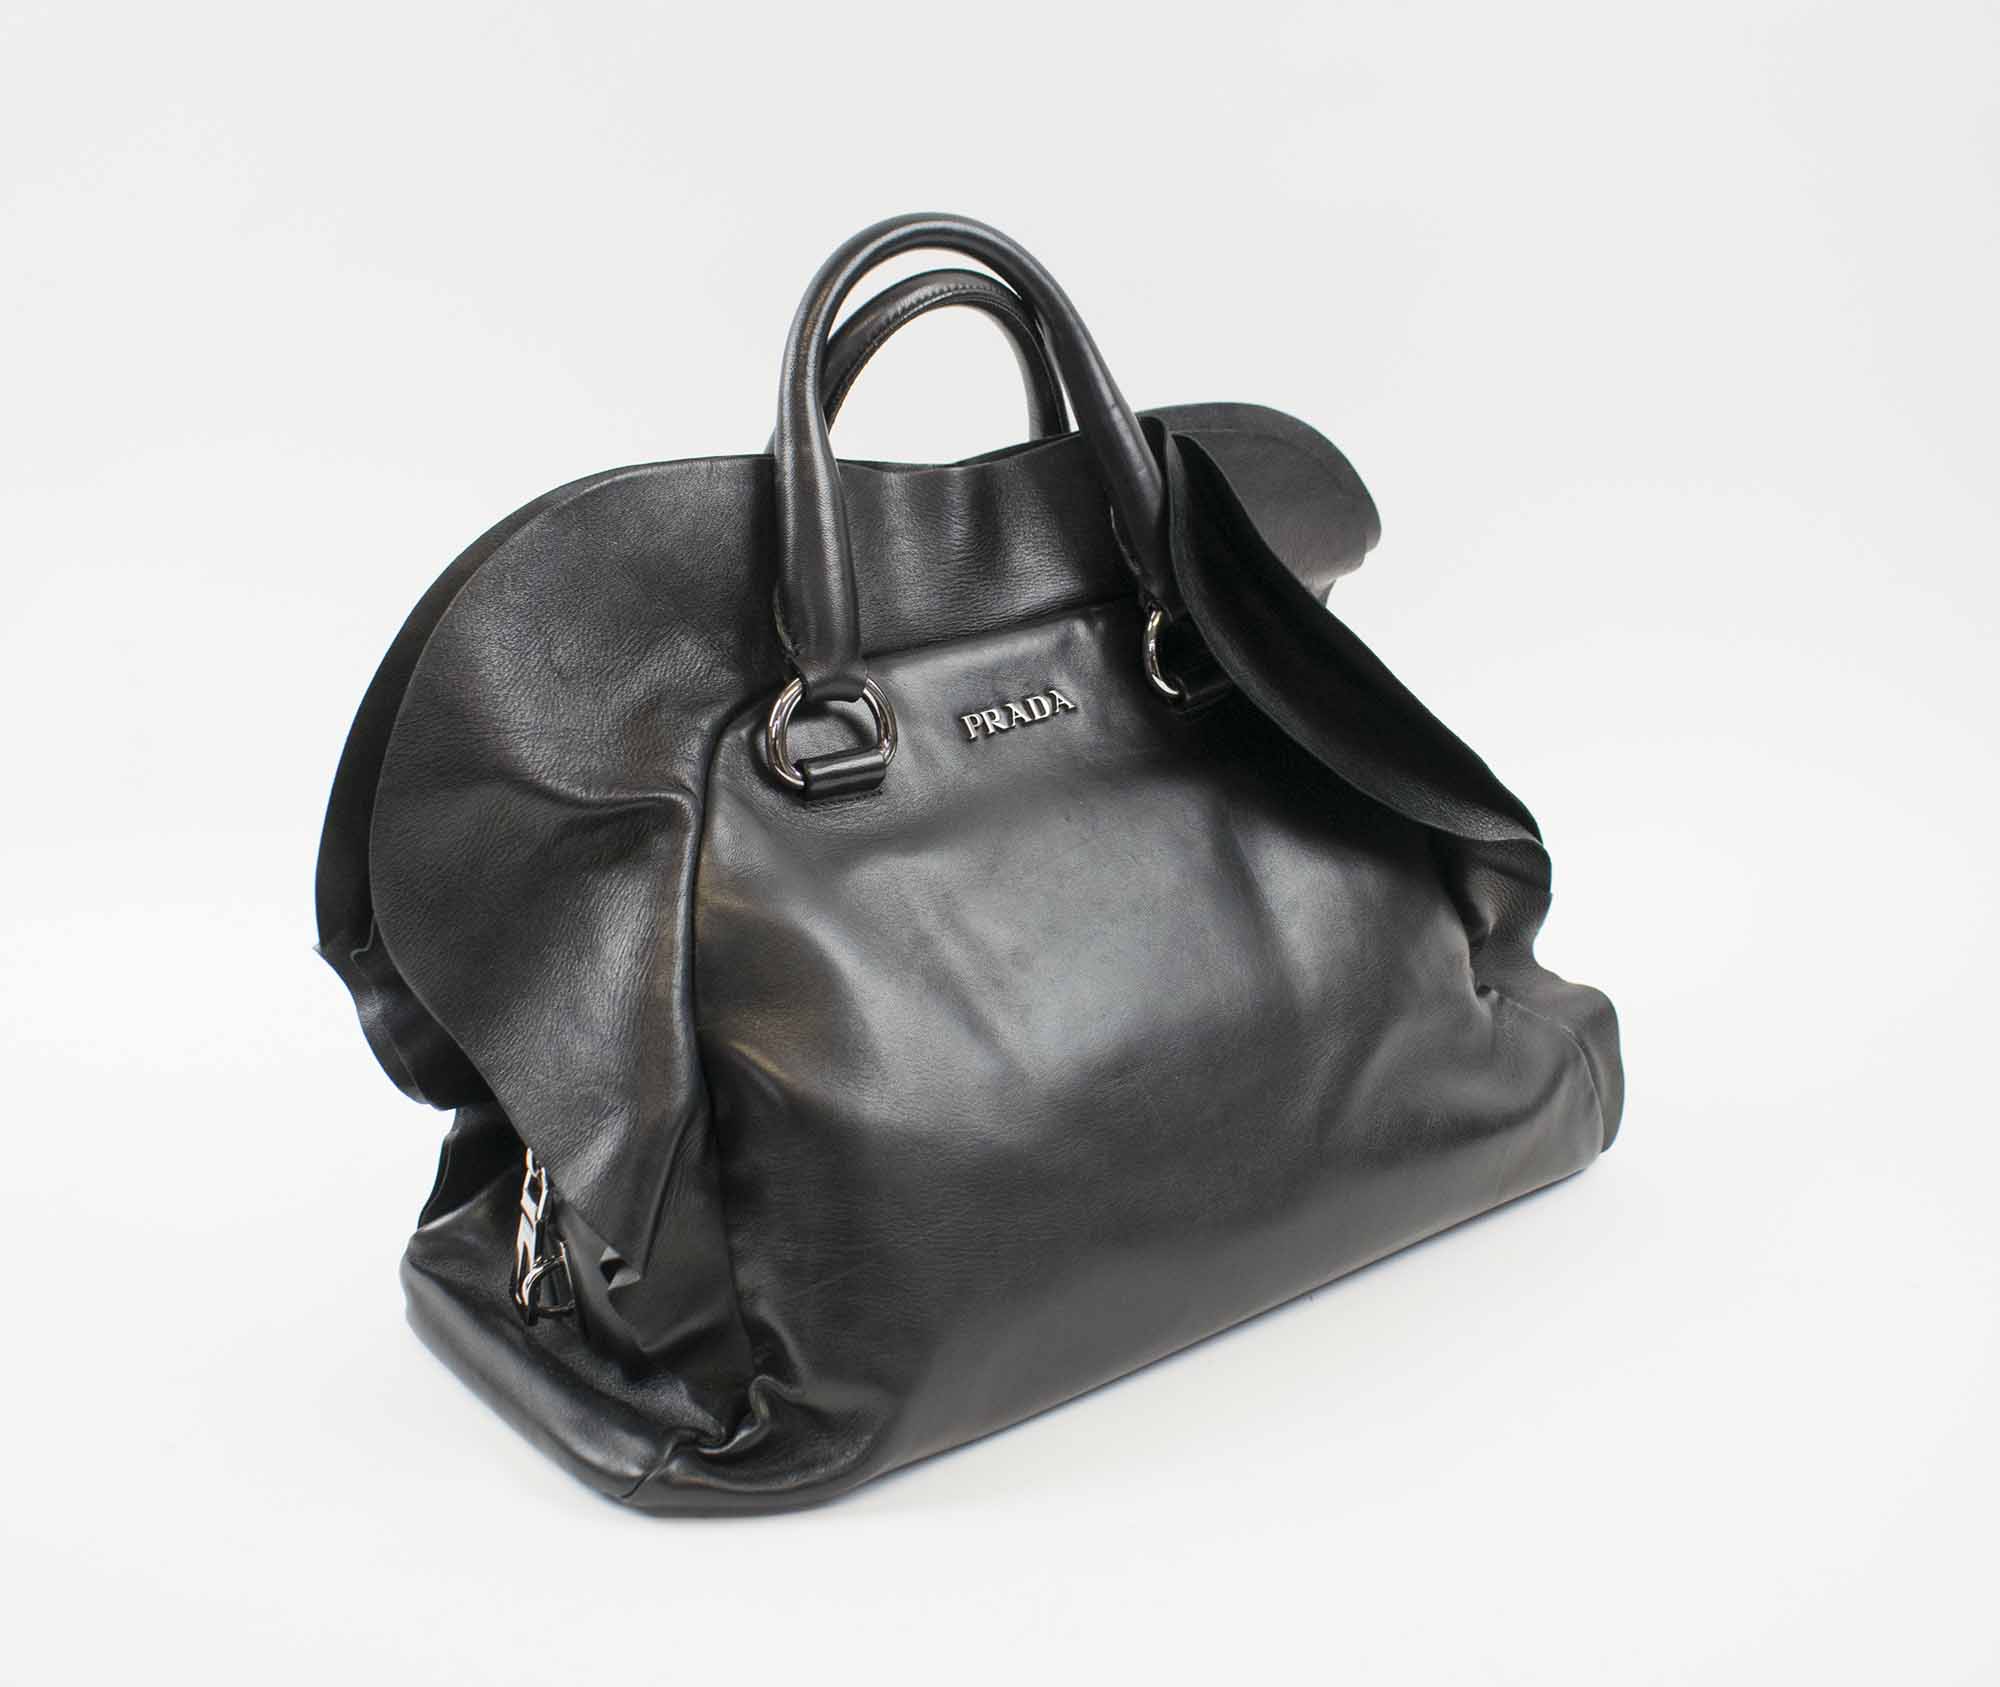 Sold at Auction: A GOOD BLACK LEATHER PRADA SOFT RUFFLE BAG. 29cm long.